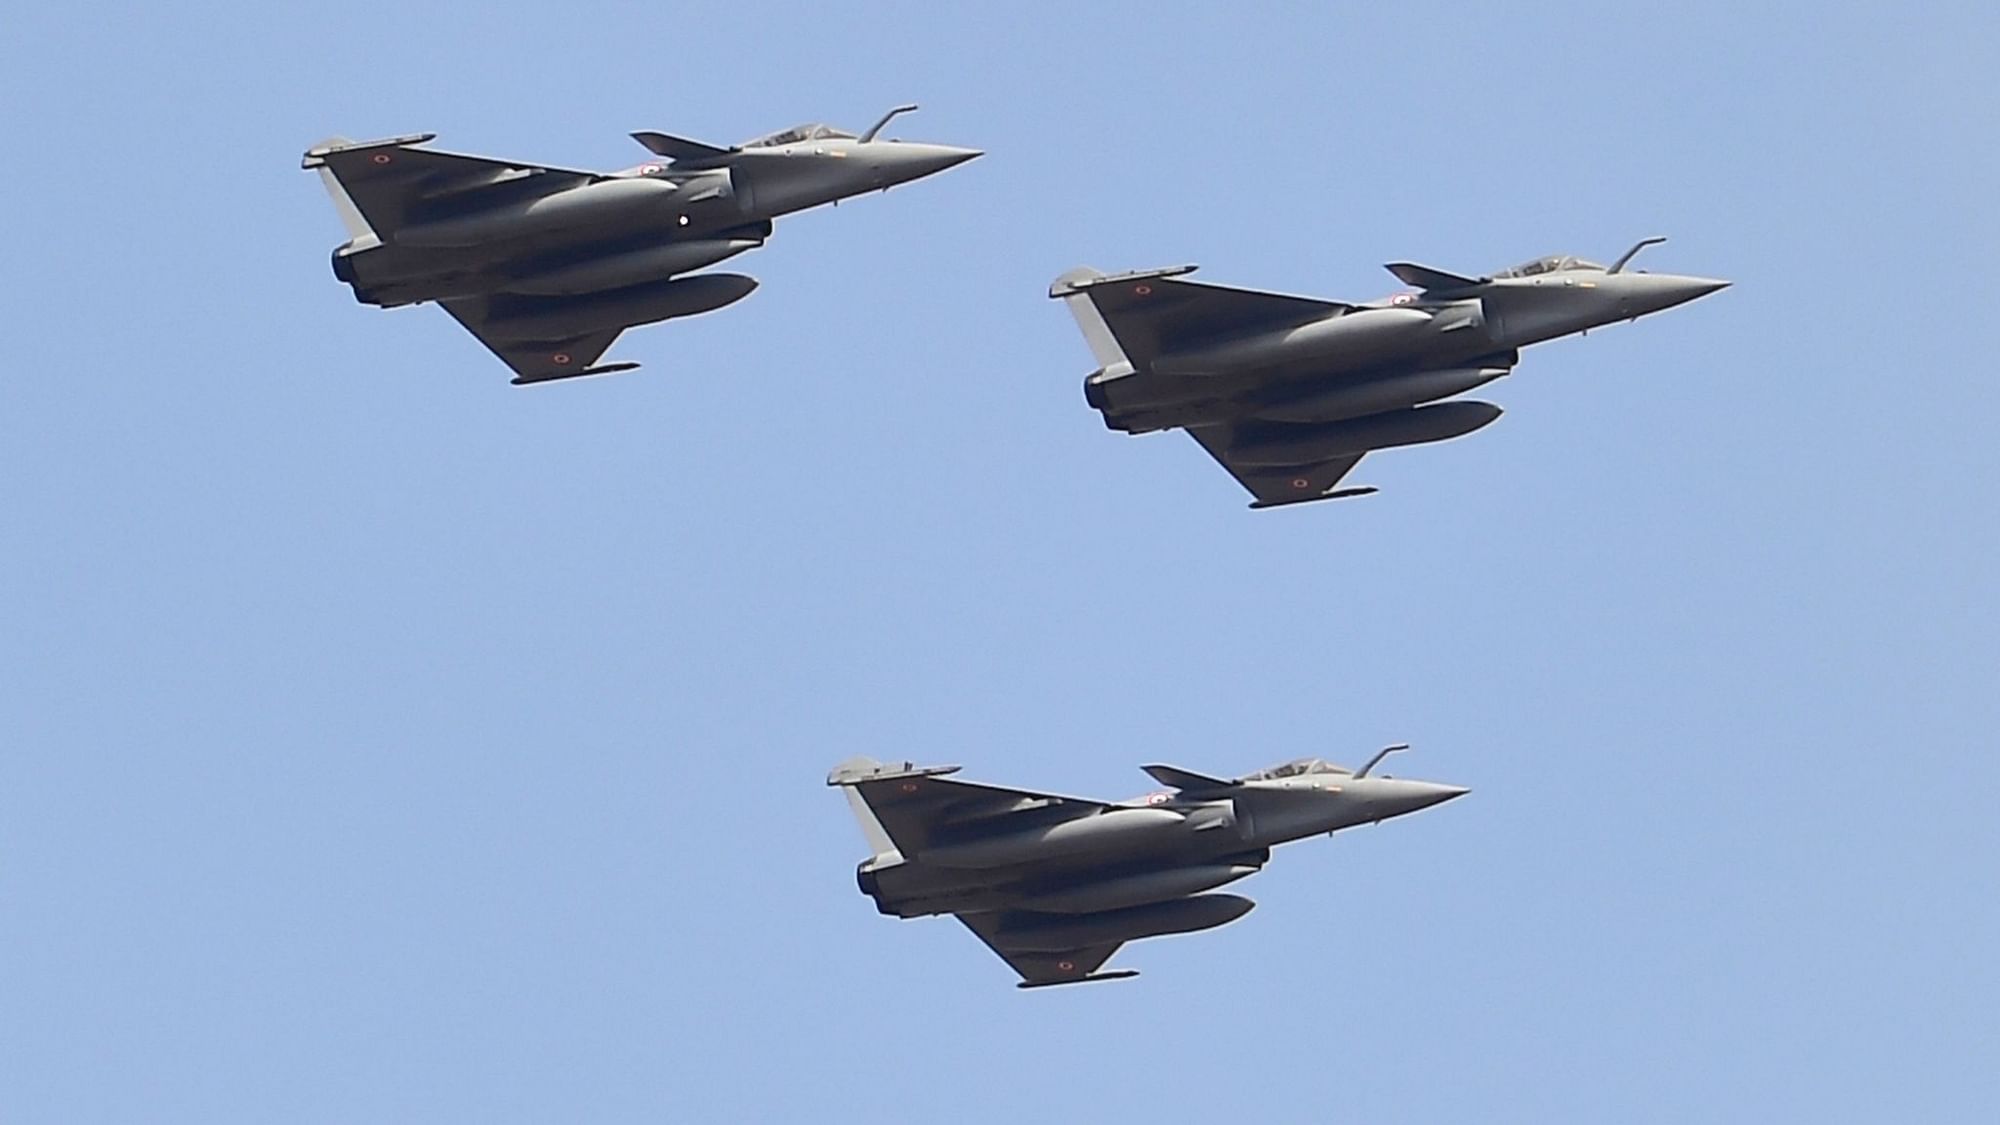 Indian Air Force’s Rafale aircrafts fly in a formation over Yelahanka air base during the inauguration of the 13th edition of Aero India, in Bengaluru, Wednesday, 3 February 2021.